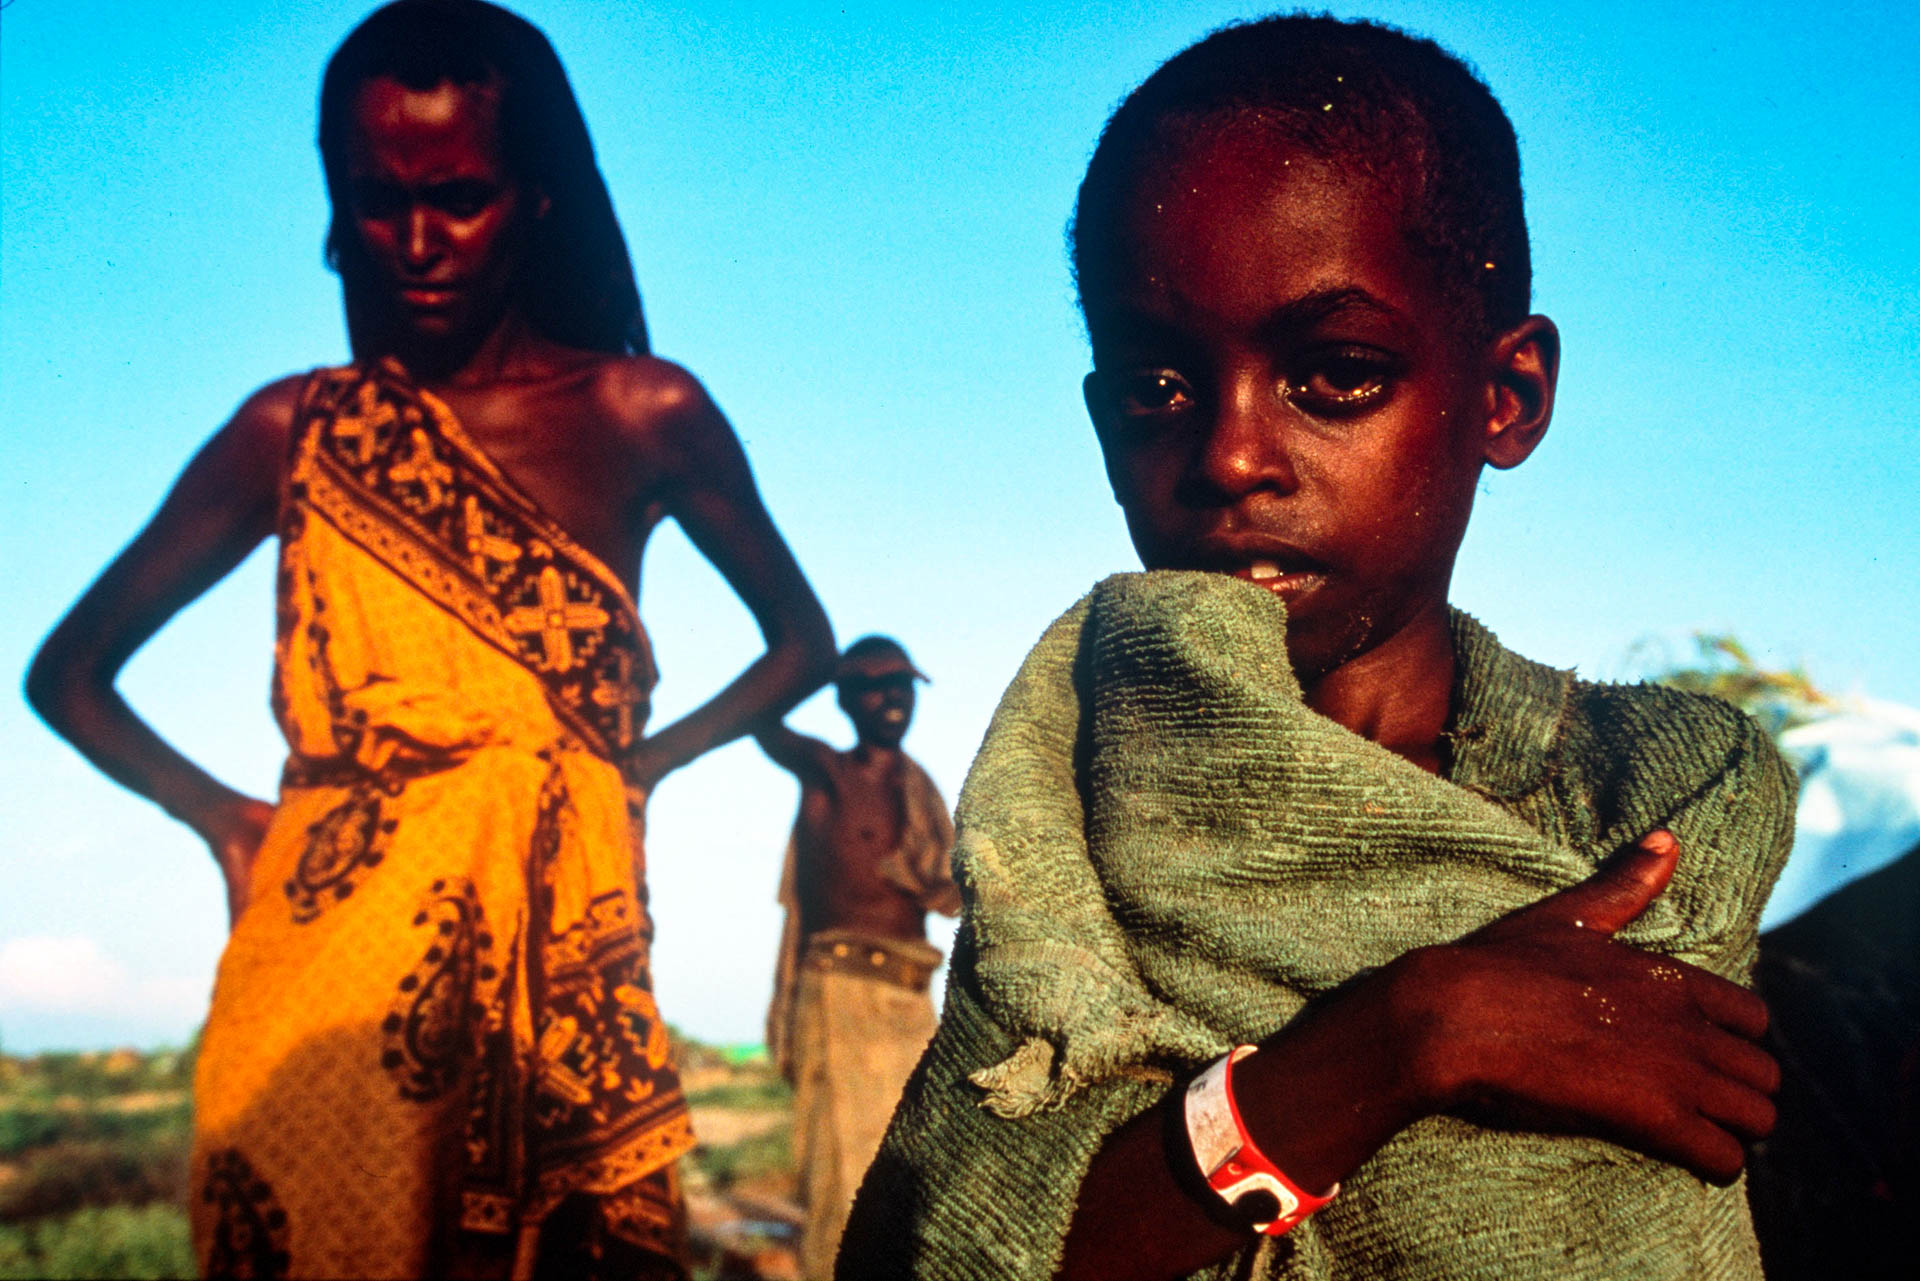  Bardera, Somalia - December 1992 The intense glance of a child who is longing for some food. 